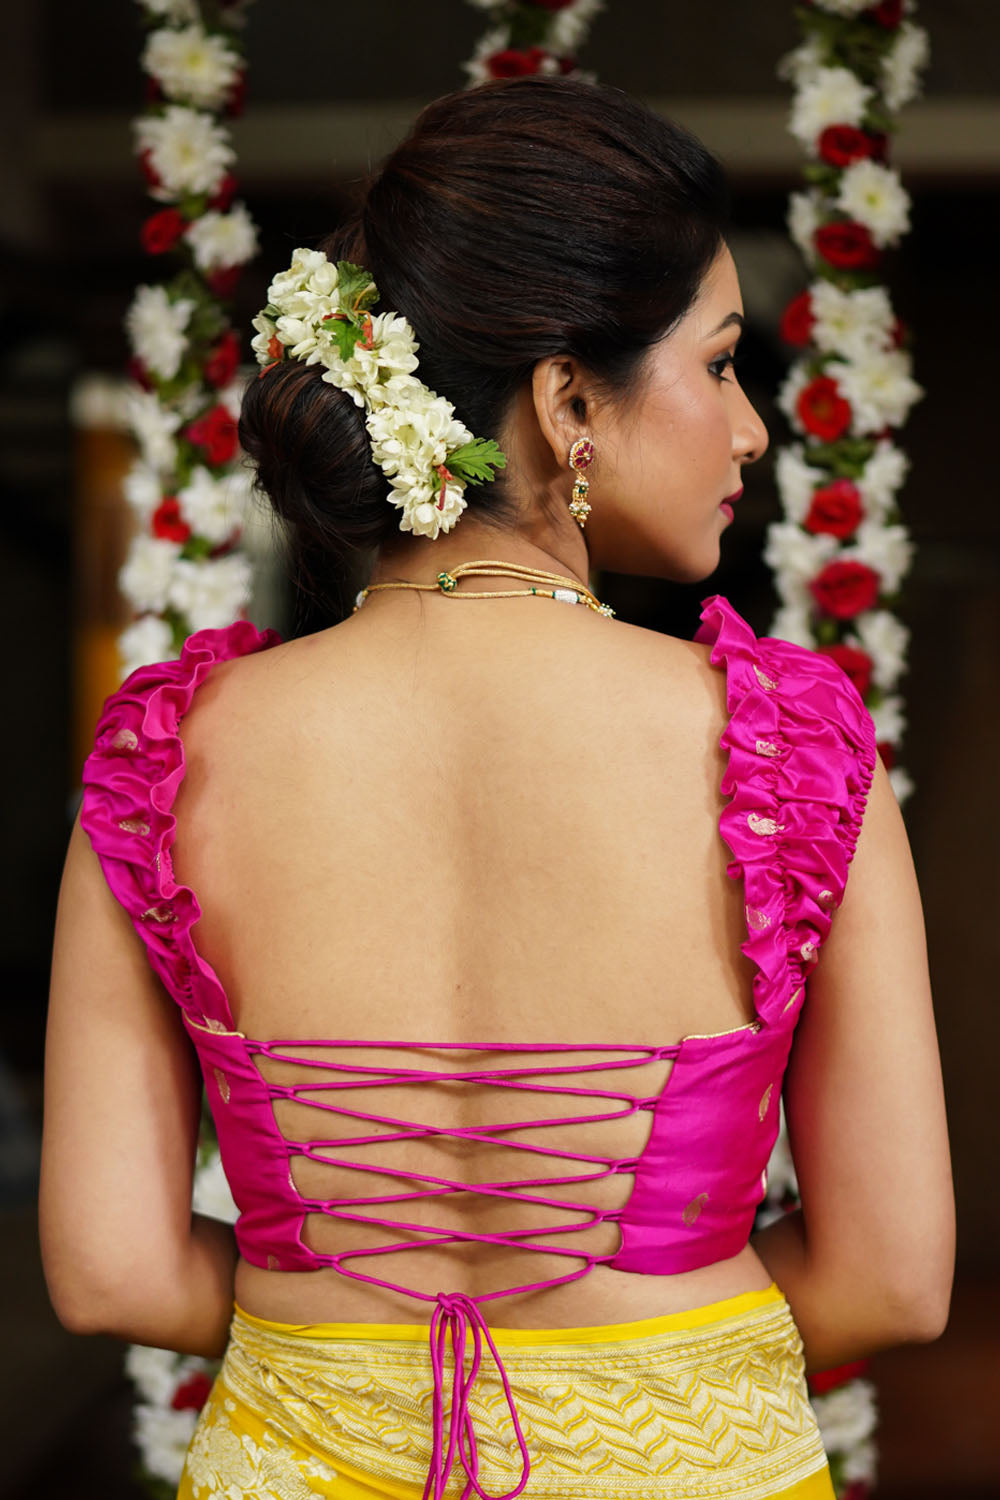 Fuchsia pink pure silk bustier blouse with gold motifs